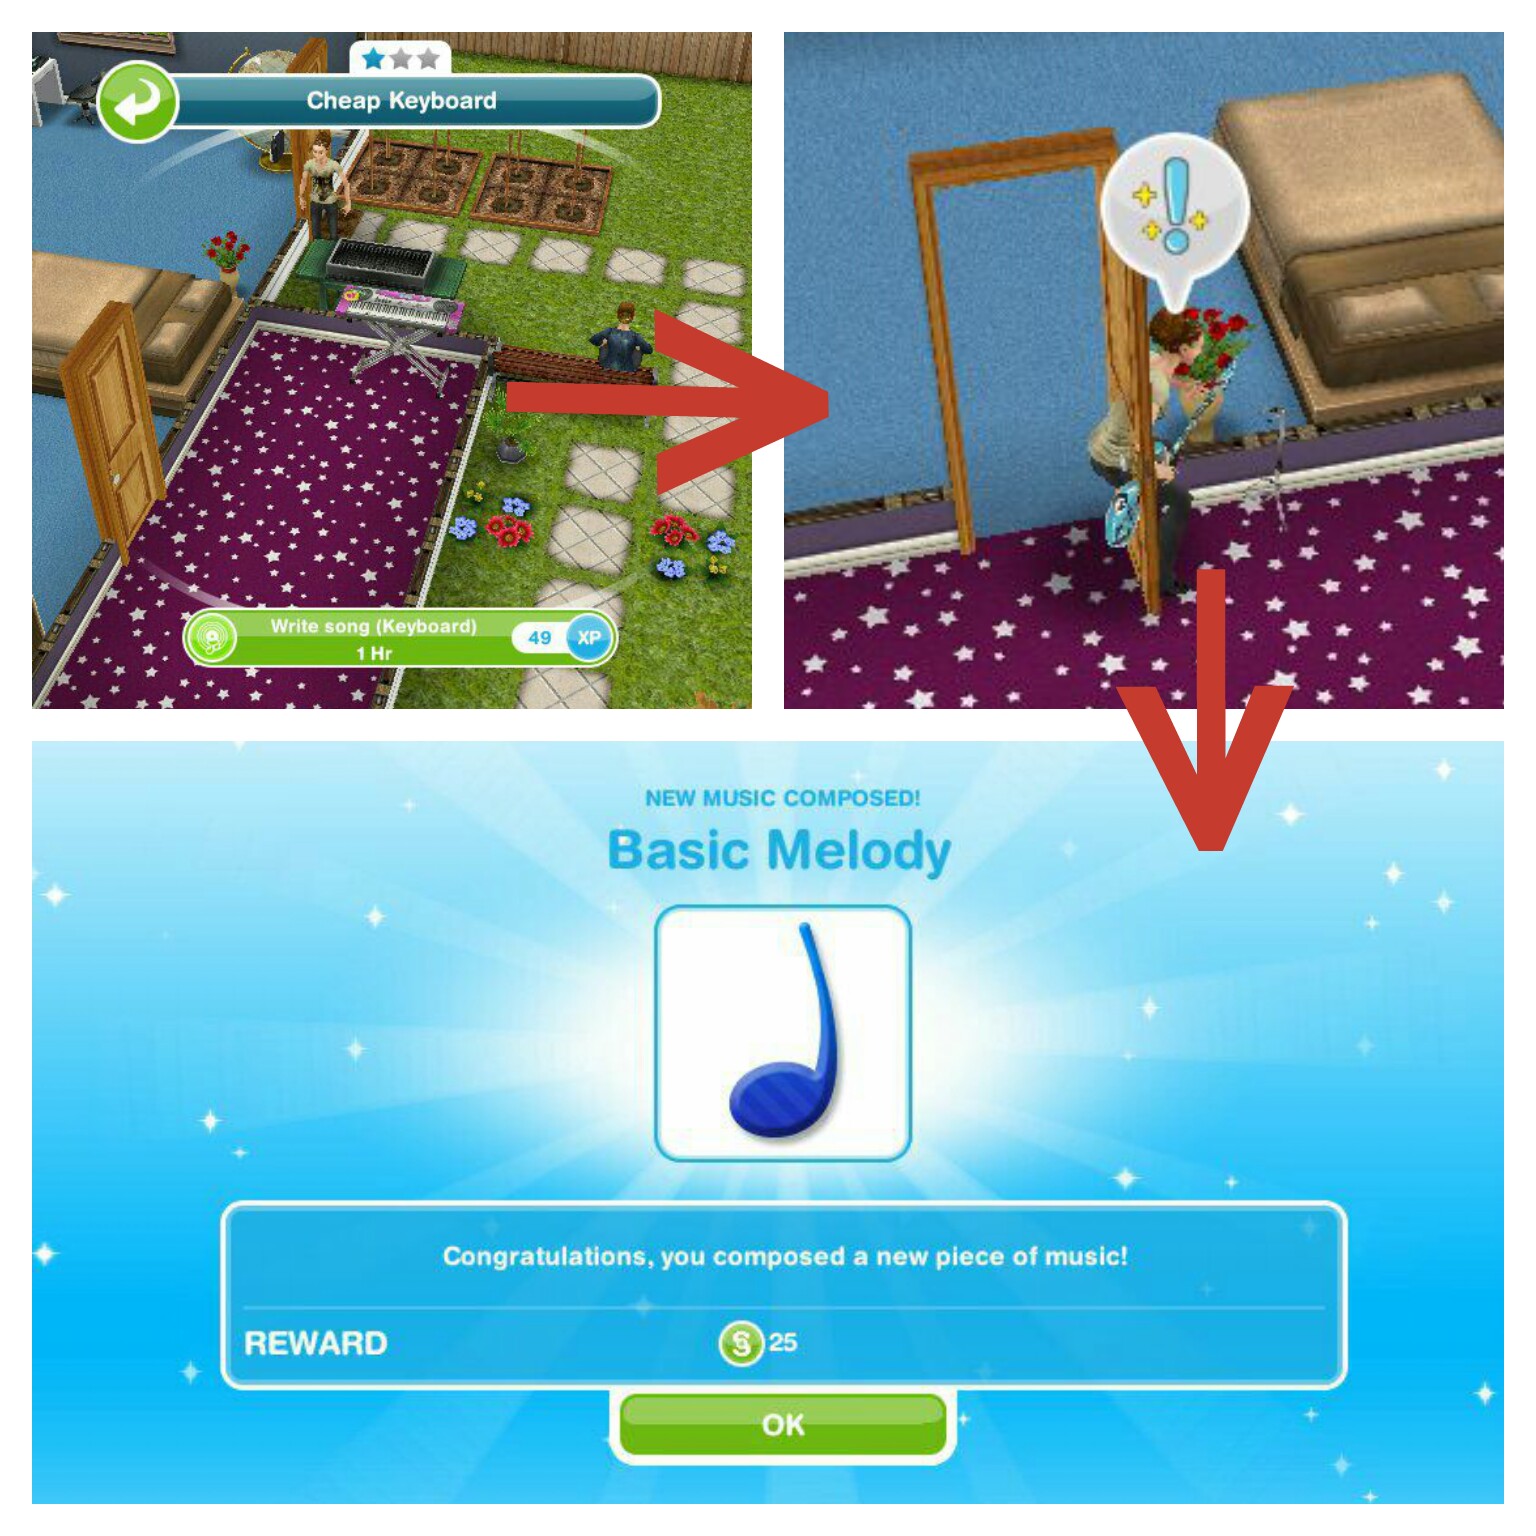 How to write songs in The Sims 4